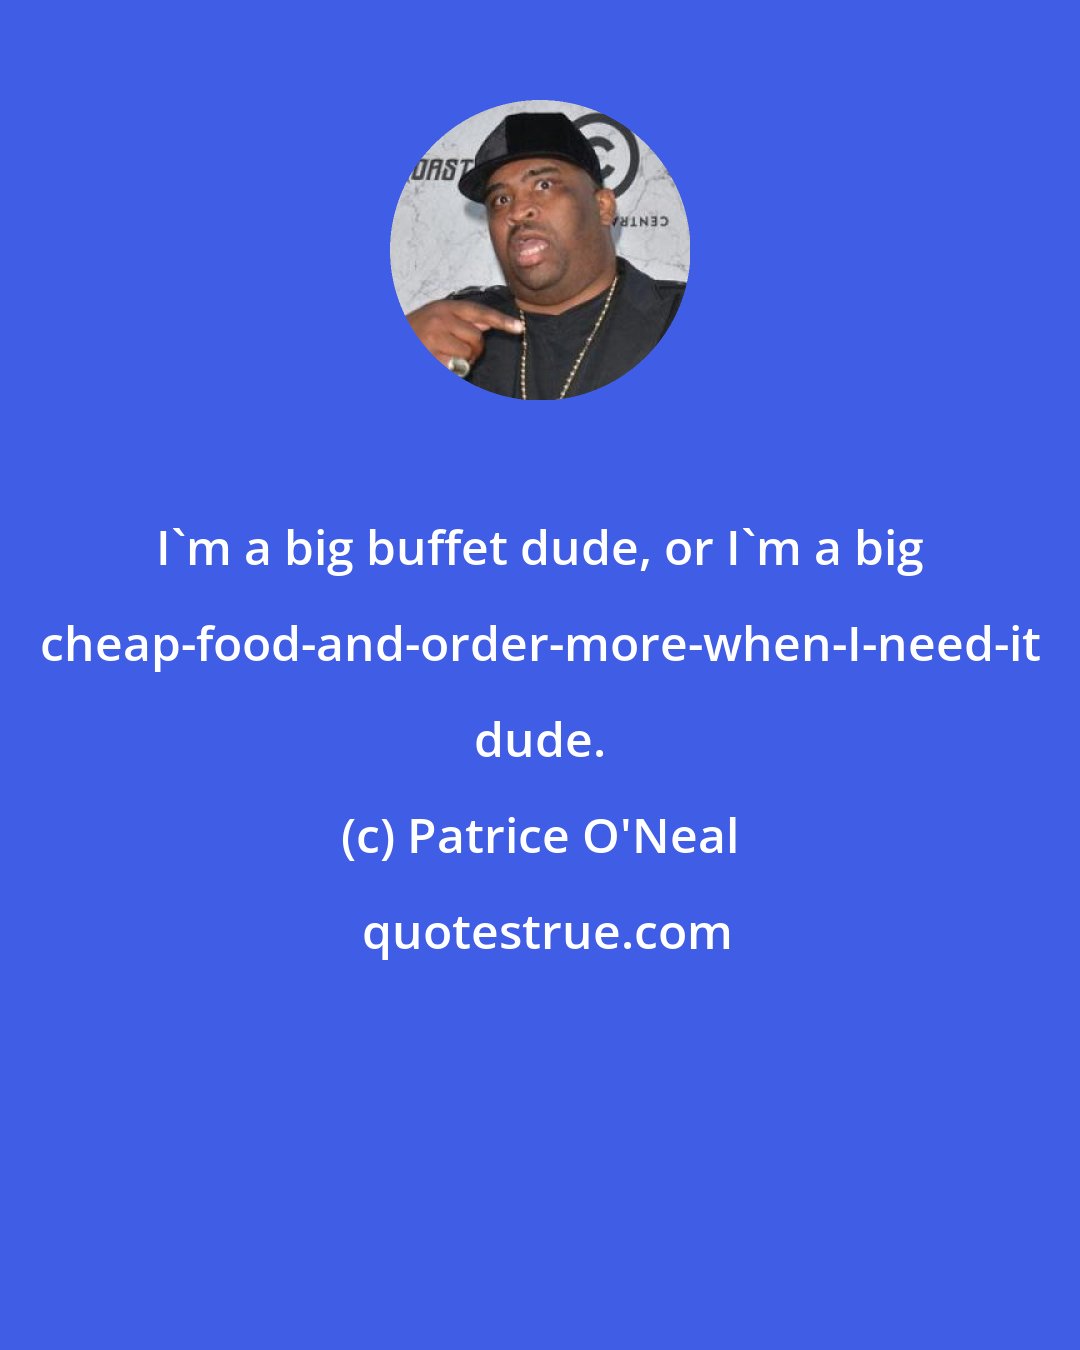 Patrice O'Neal: I'm a big buffet dude, or I'm a big cheap-food-and-order-more-when-I-need-it dude.